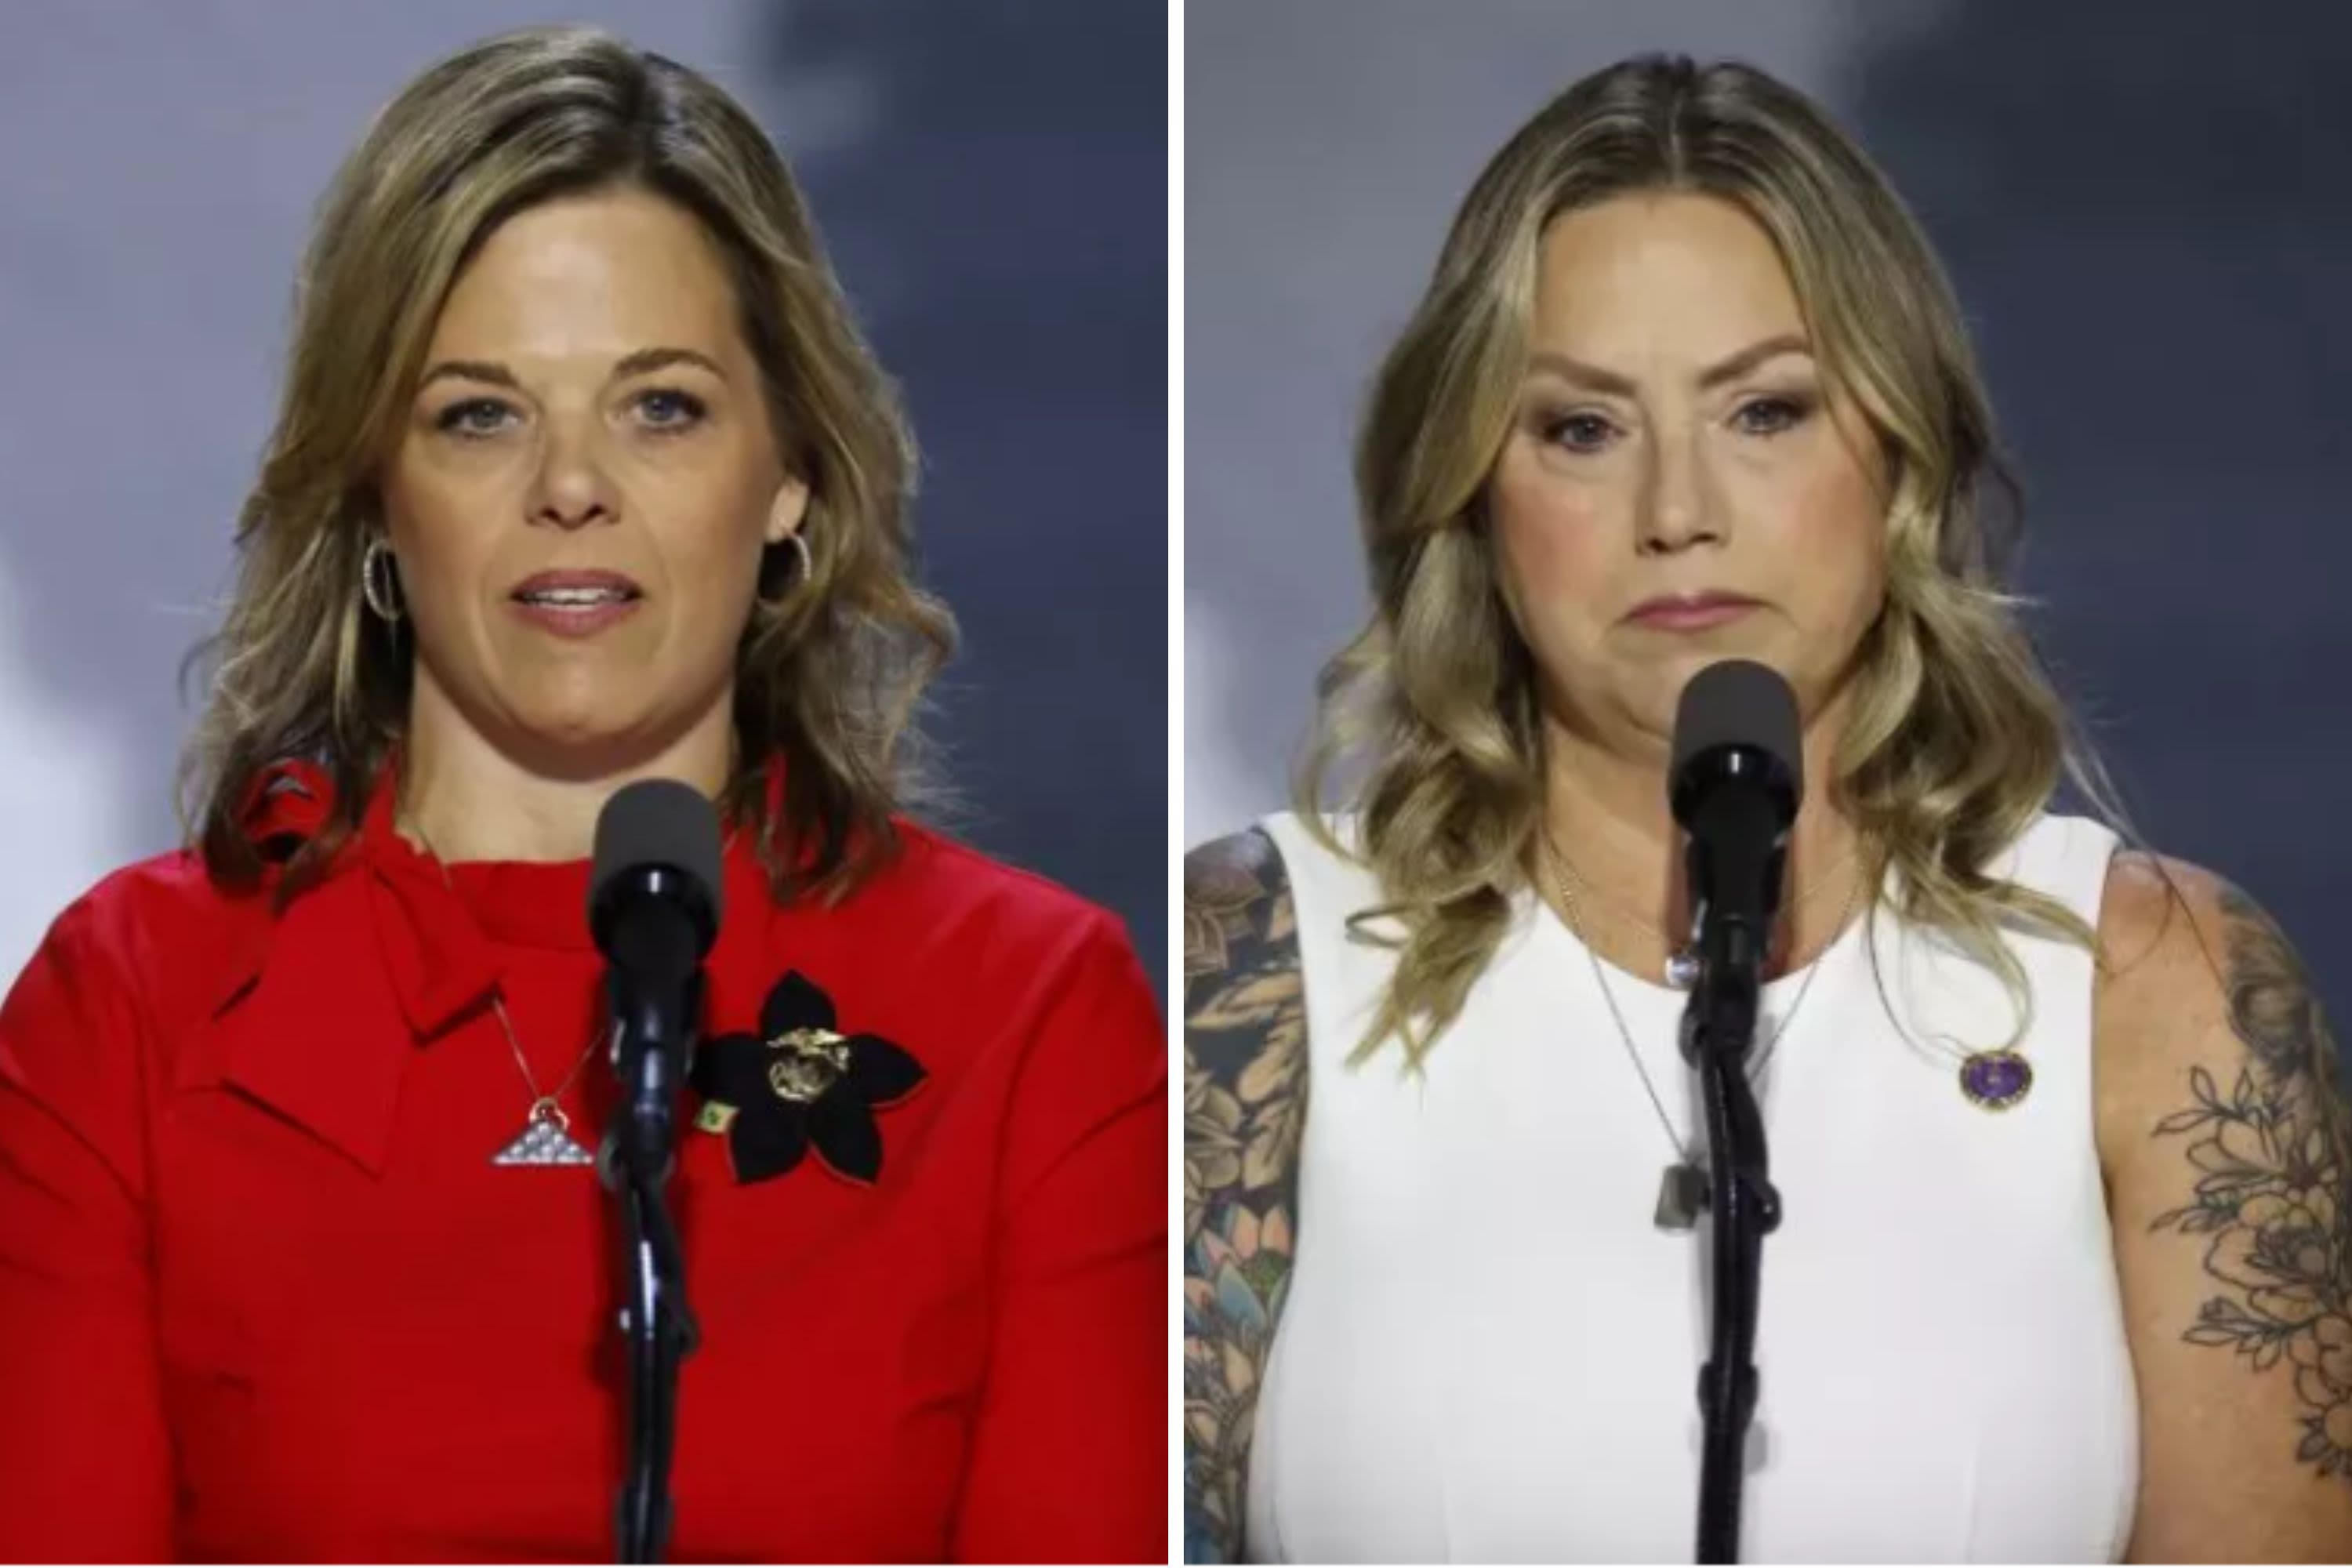 Gold Star families bring RNC to tears: 'I wasn't alone in my grief'